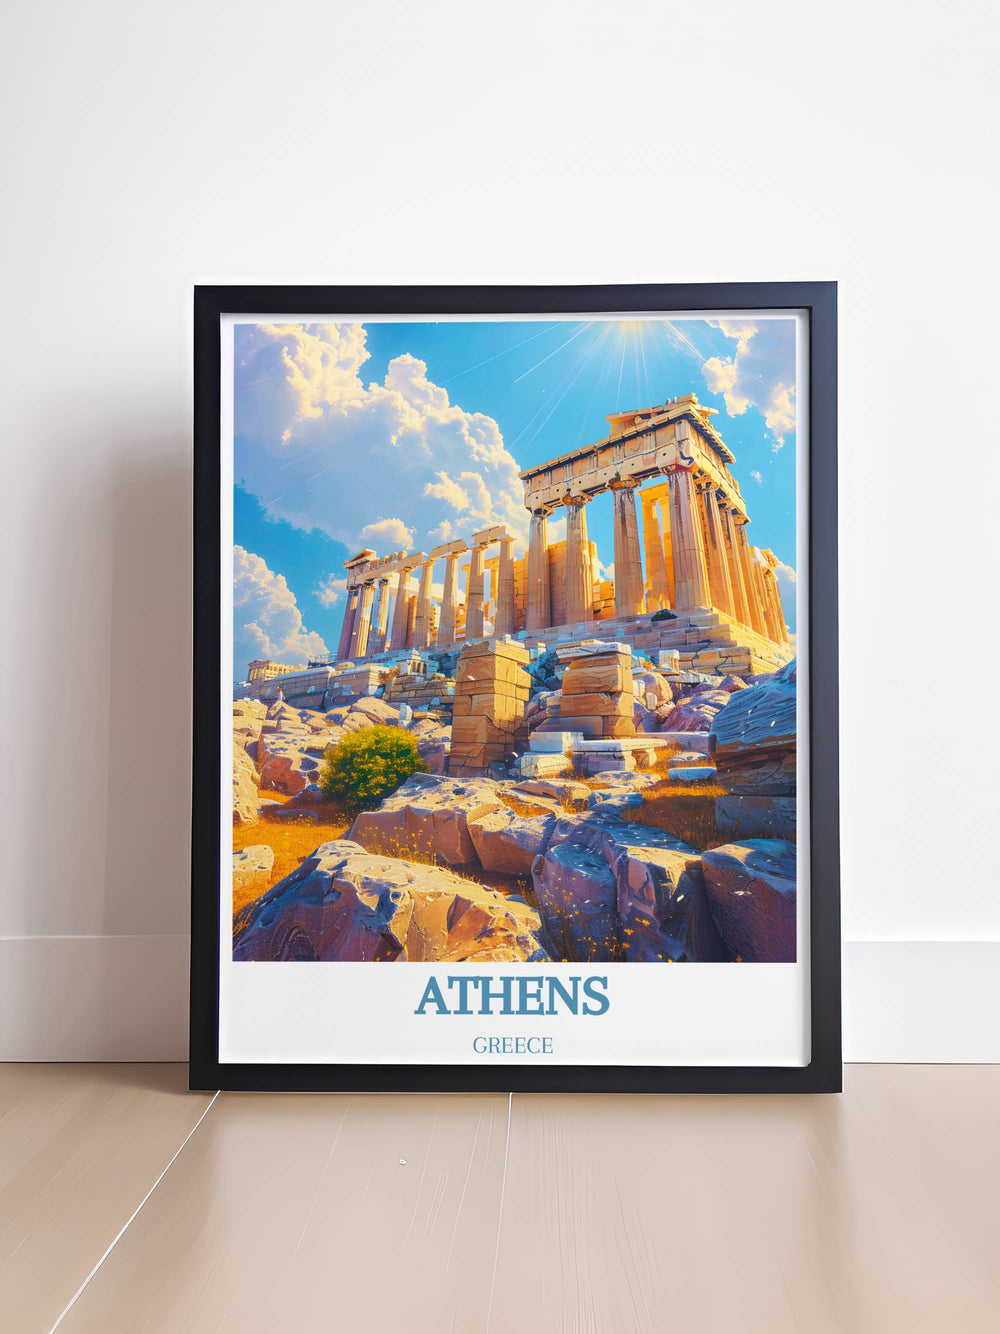 Detailed artistic representation of the Acropolis iconic columns and steps, offering a historical journey through art.